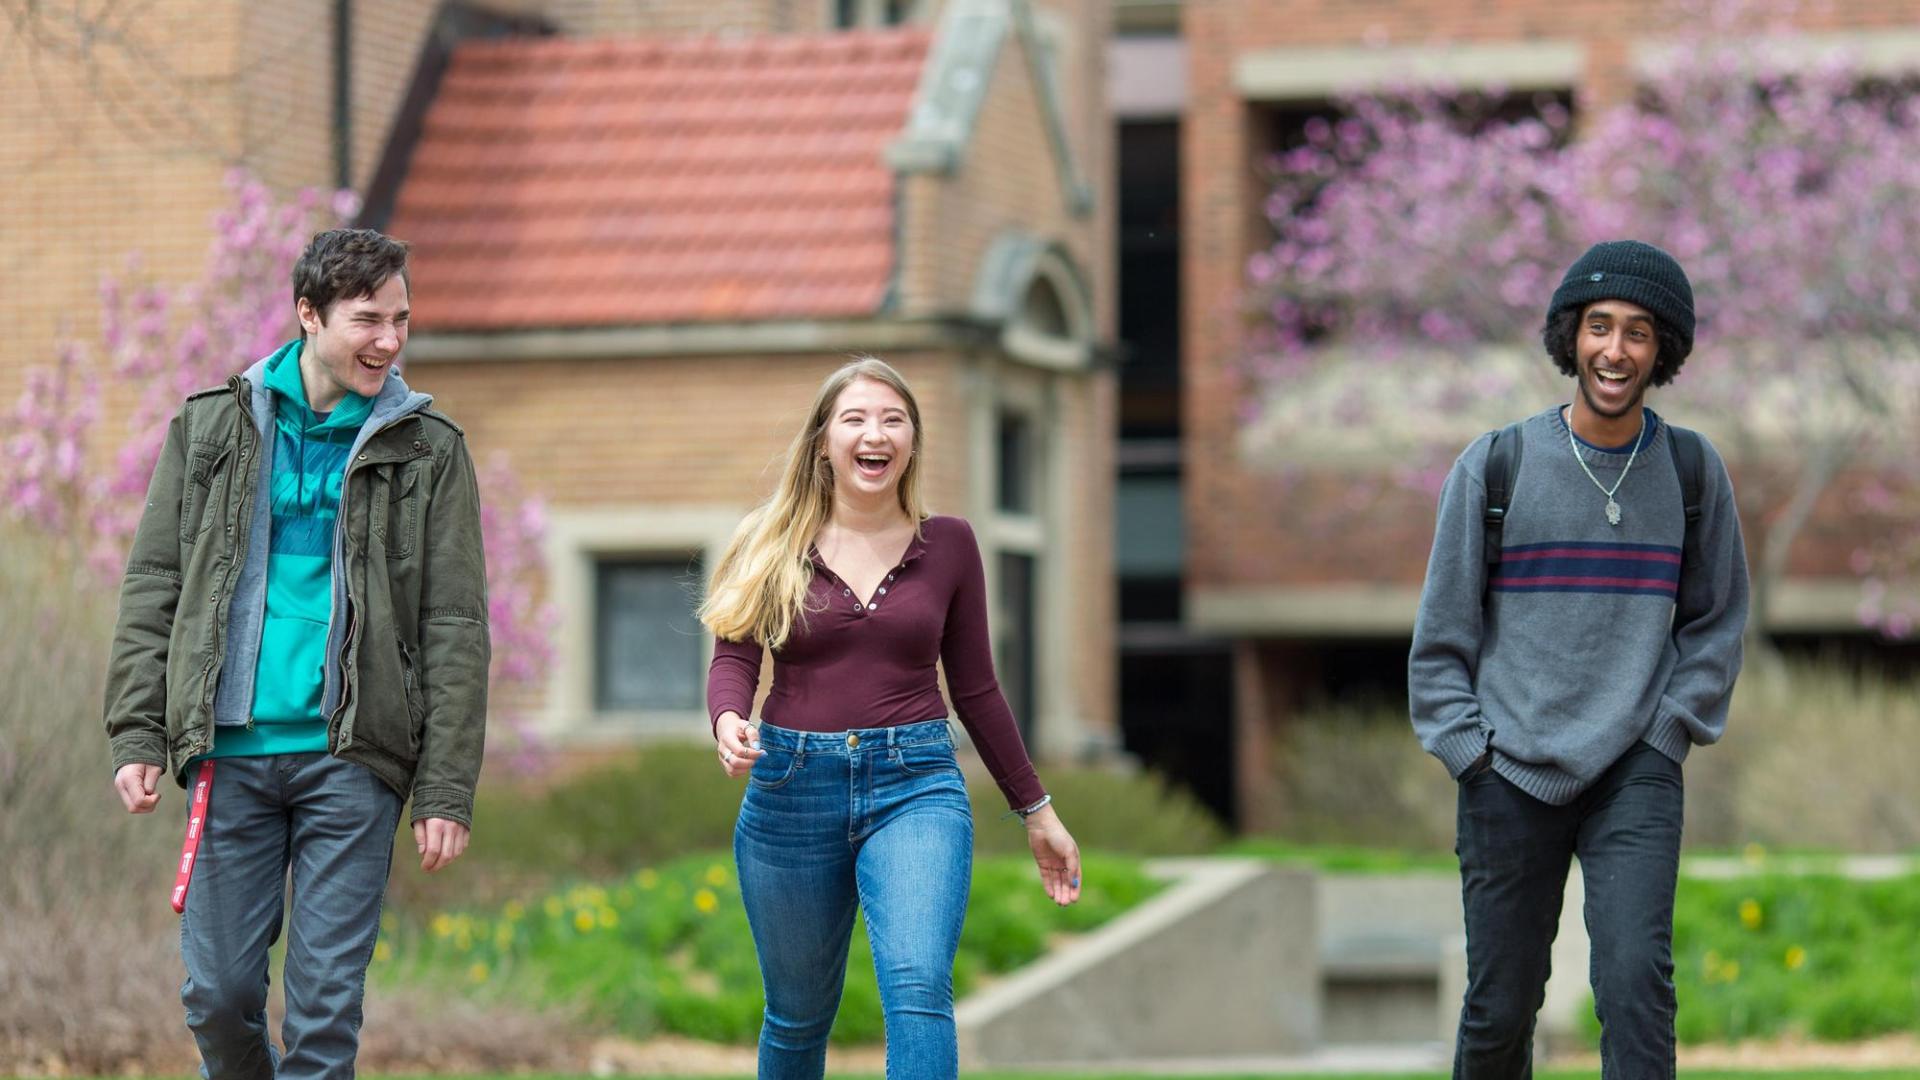 three students walking on 51 campus in spring, with flowering trees